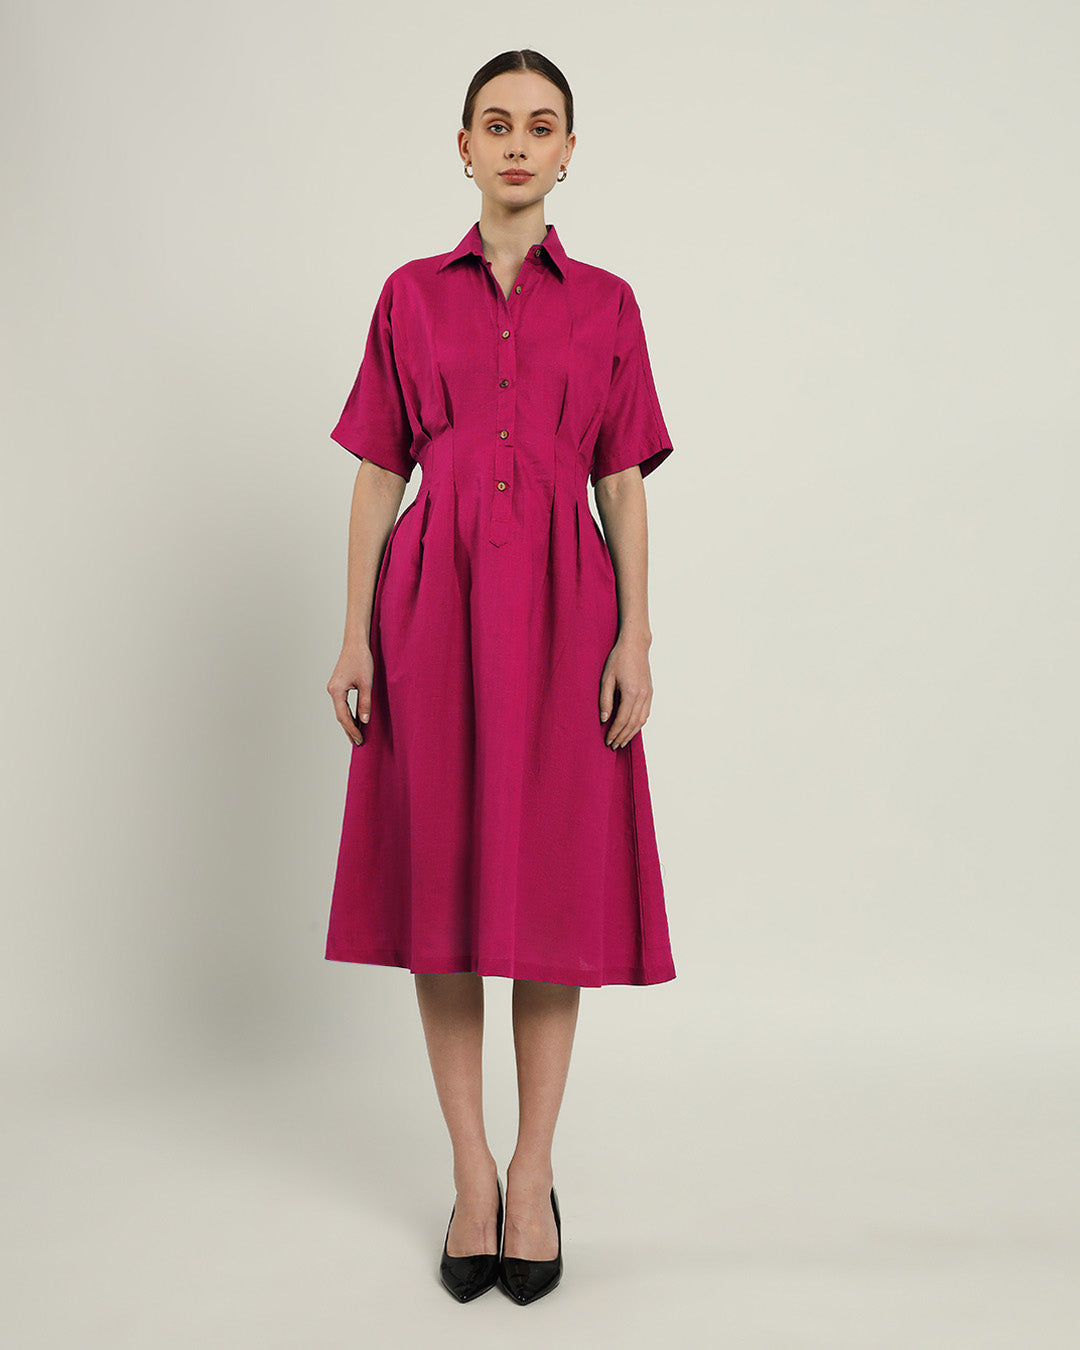 The Salford Berry Cotton Dress